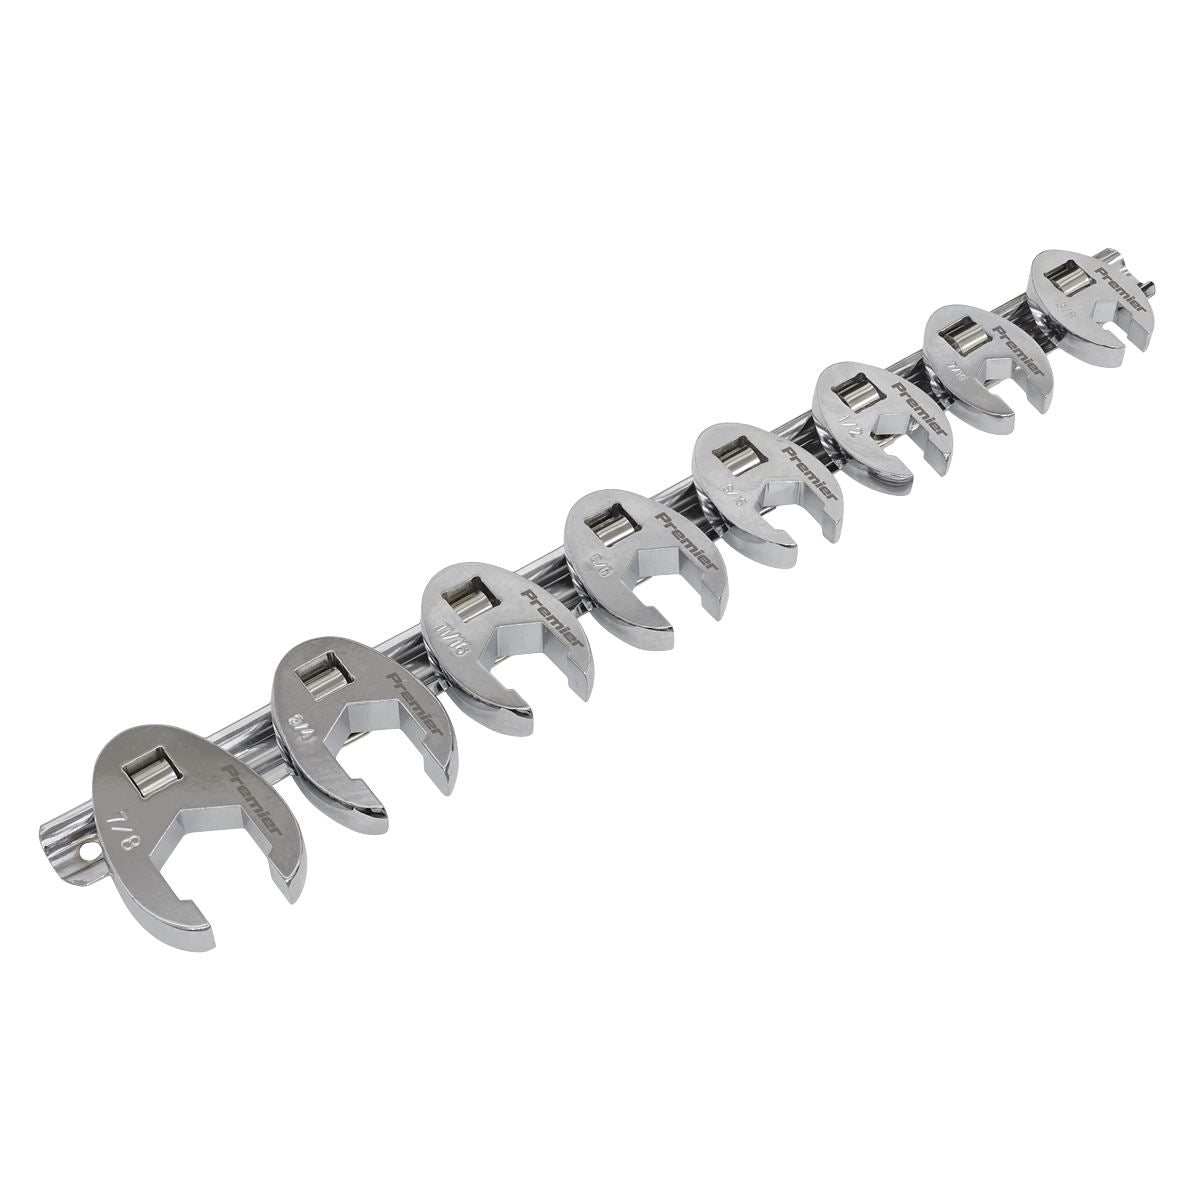 Sealey Premier Crow's Foot Spanner Set 8pc 3/8"Sq Drive Imperial